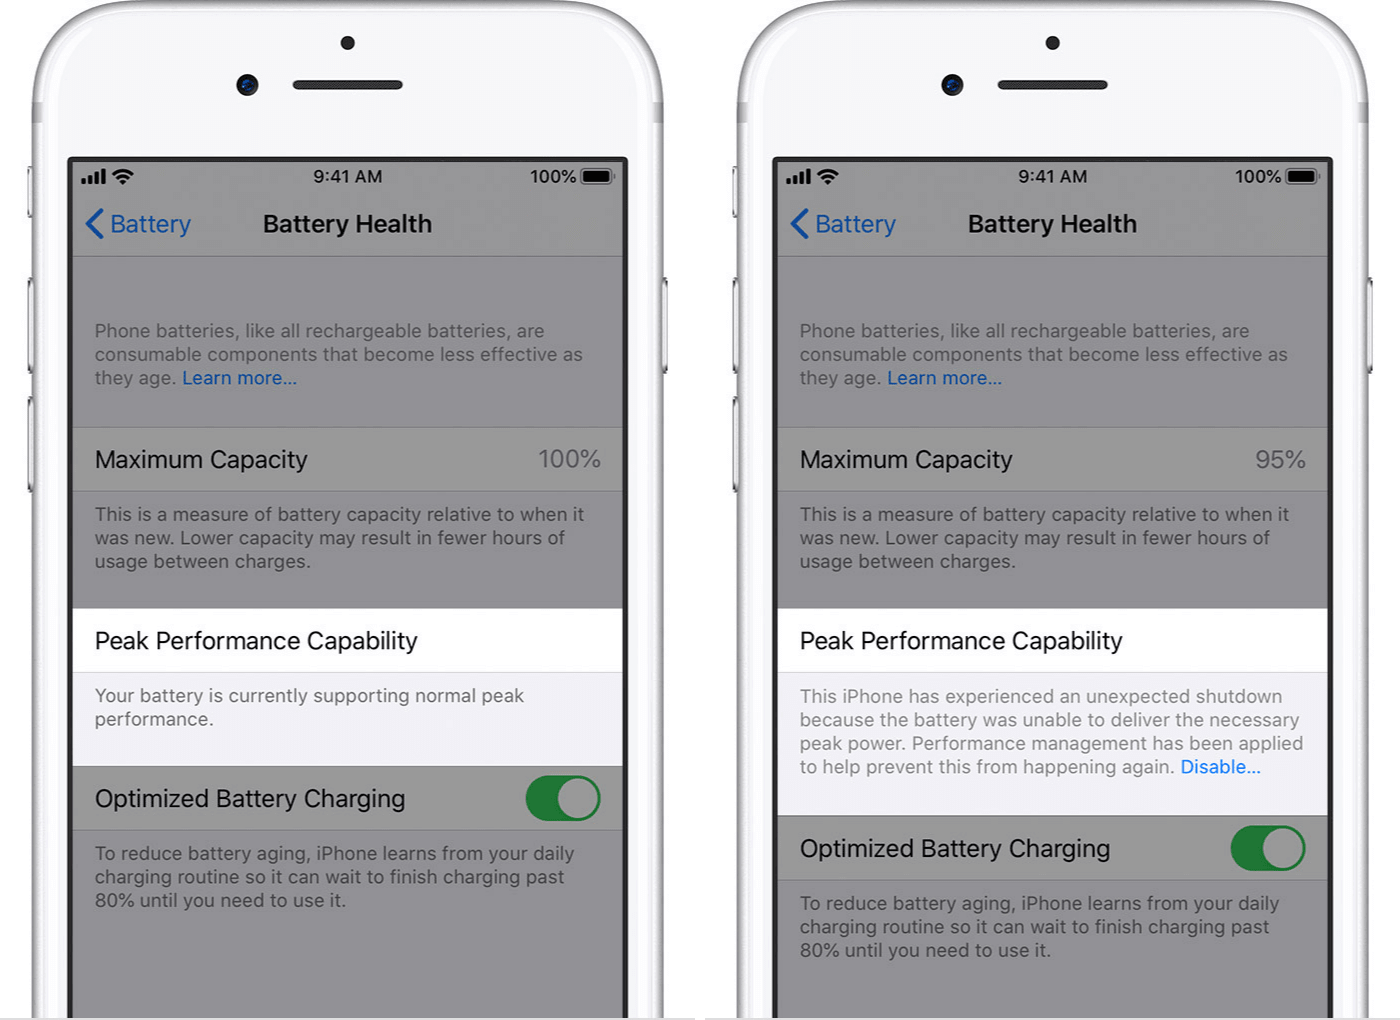 How to check iPhone battery health? Is iPhone battery health 85 good or bad?